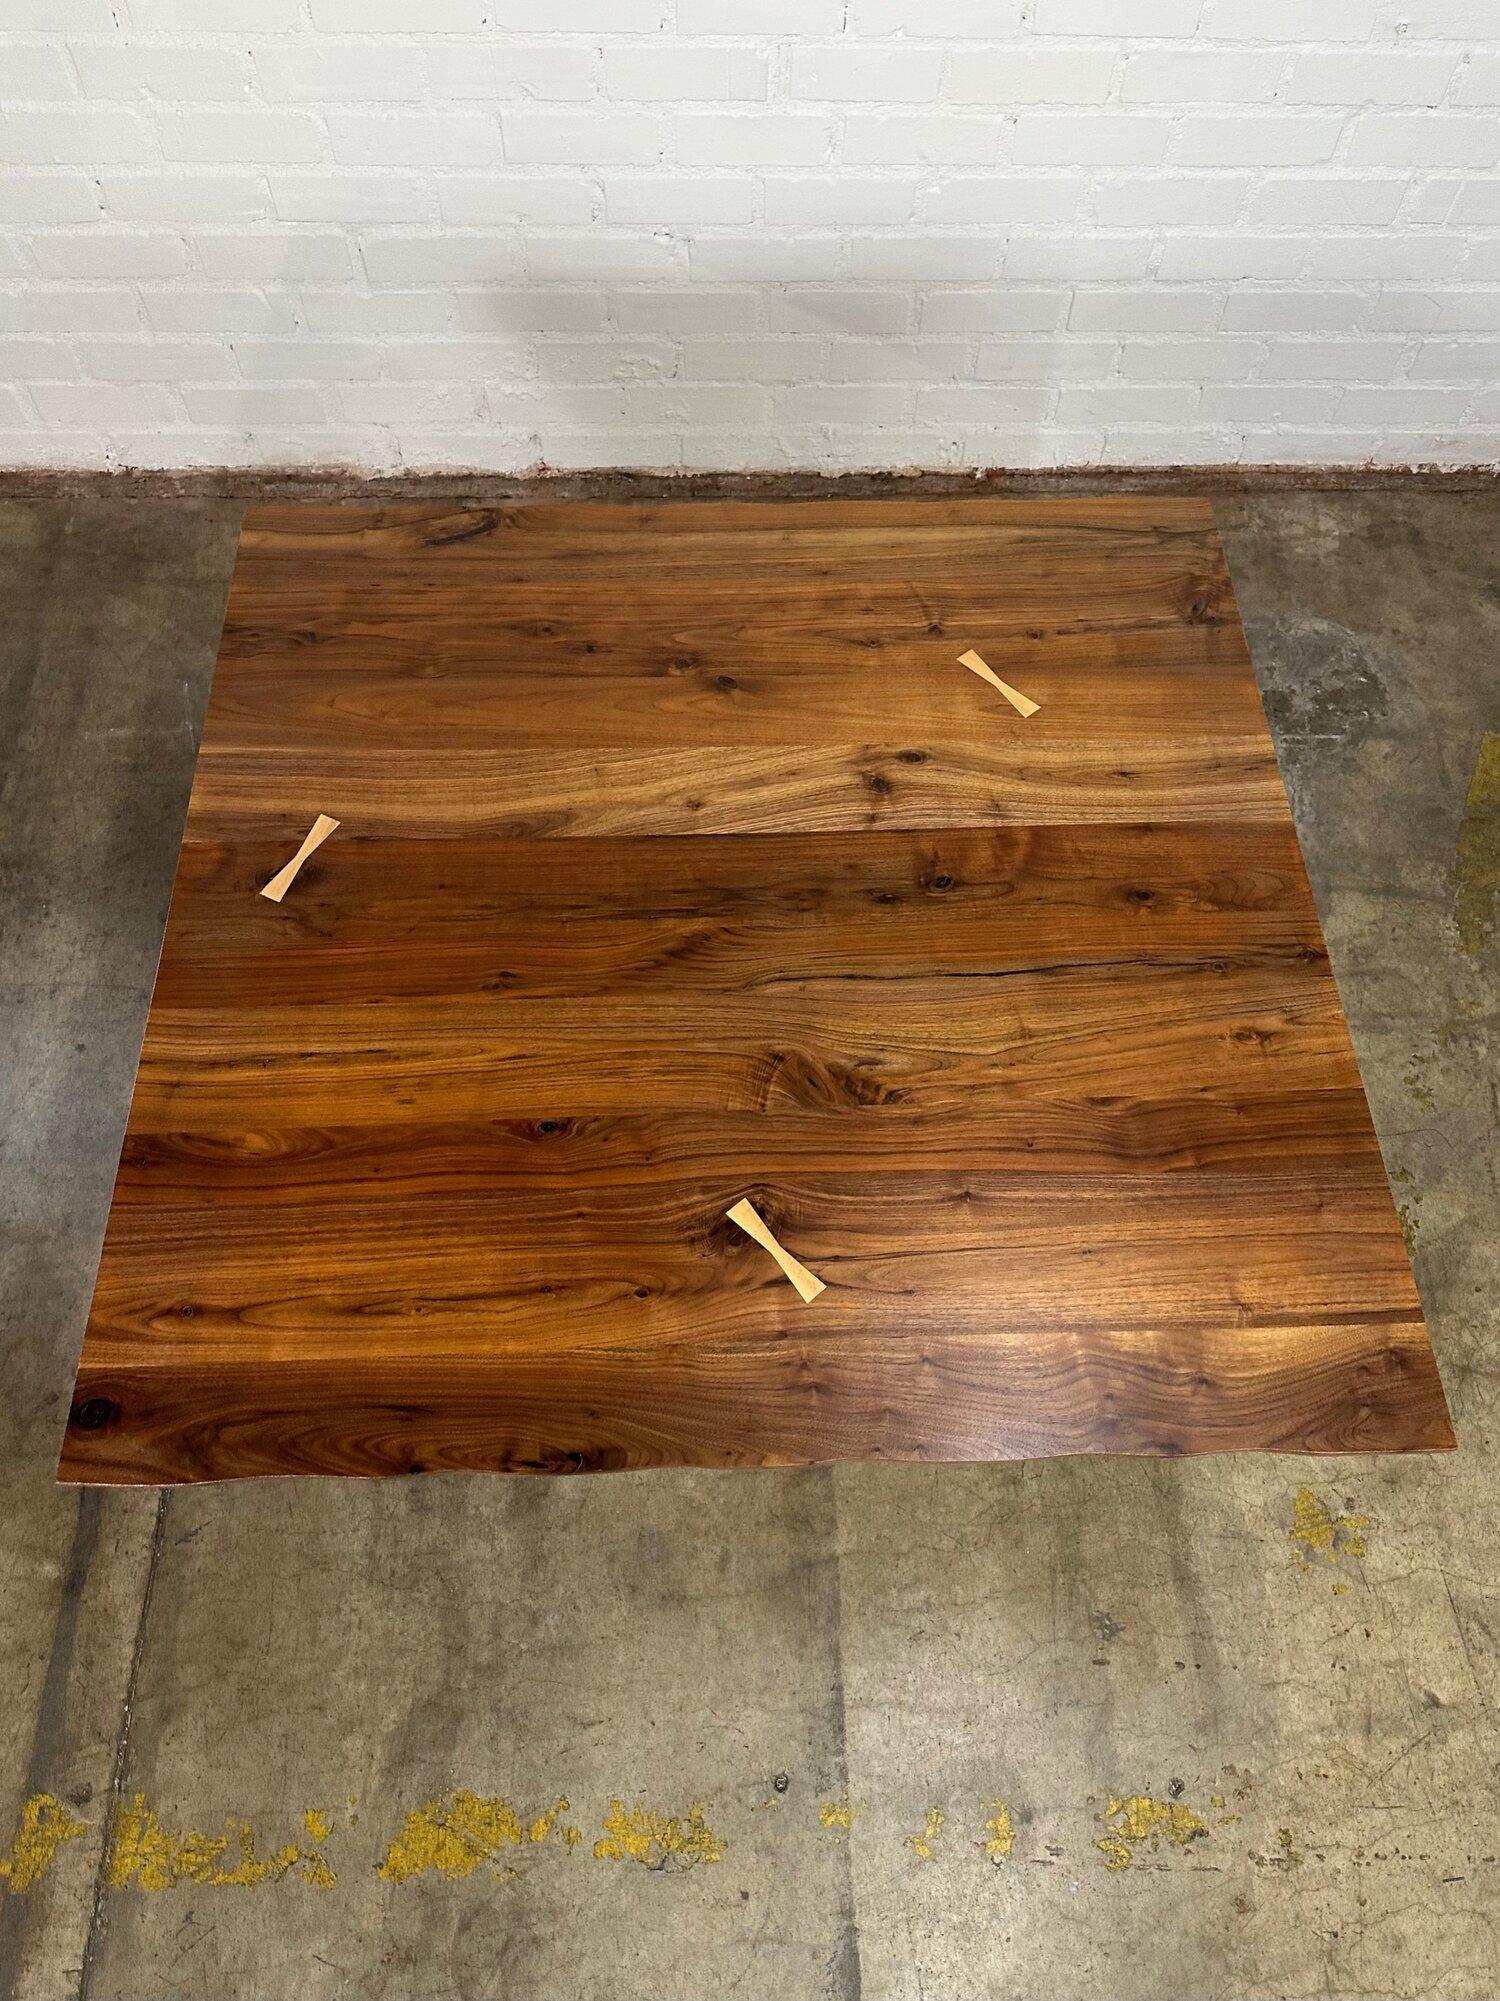 Measures: W48 D47.5 H30 KC28.5

Reimagined walnut slab compact dining table. Surface was salvaged, refinished and inlay was added to help structural integrity of surface. New squiggle legs were handcrafted and assembled in house. Item shows in